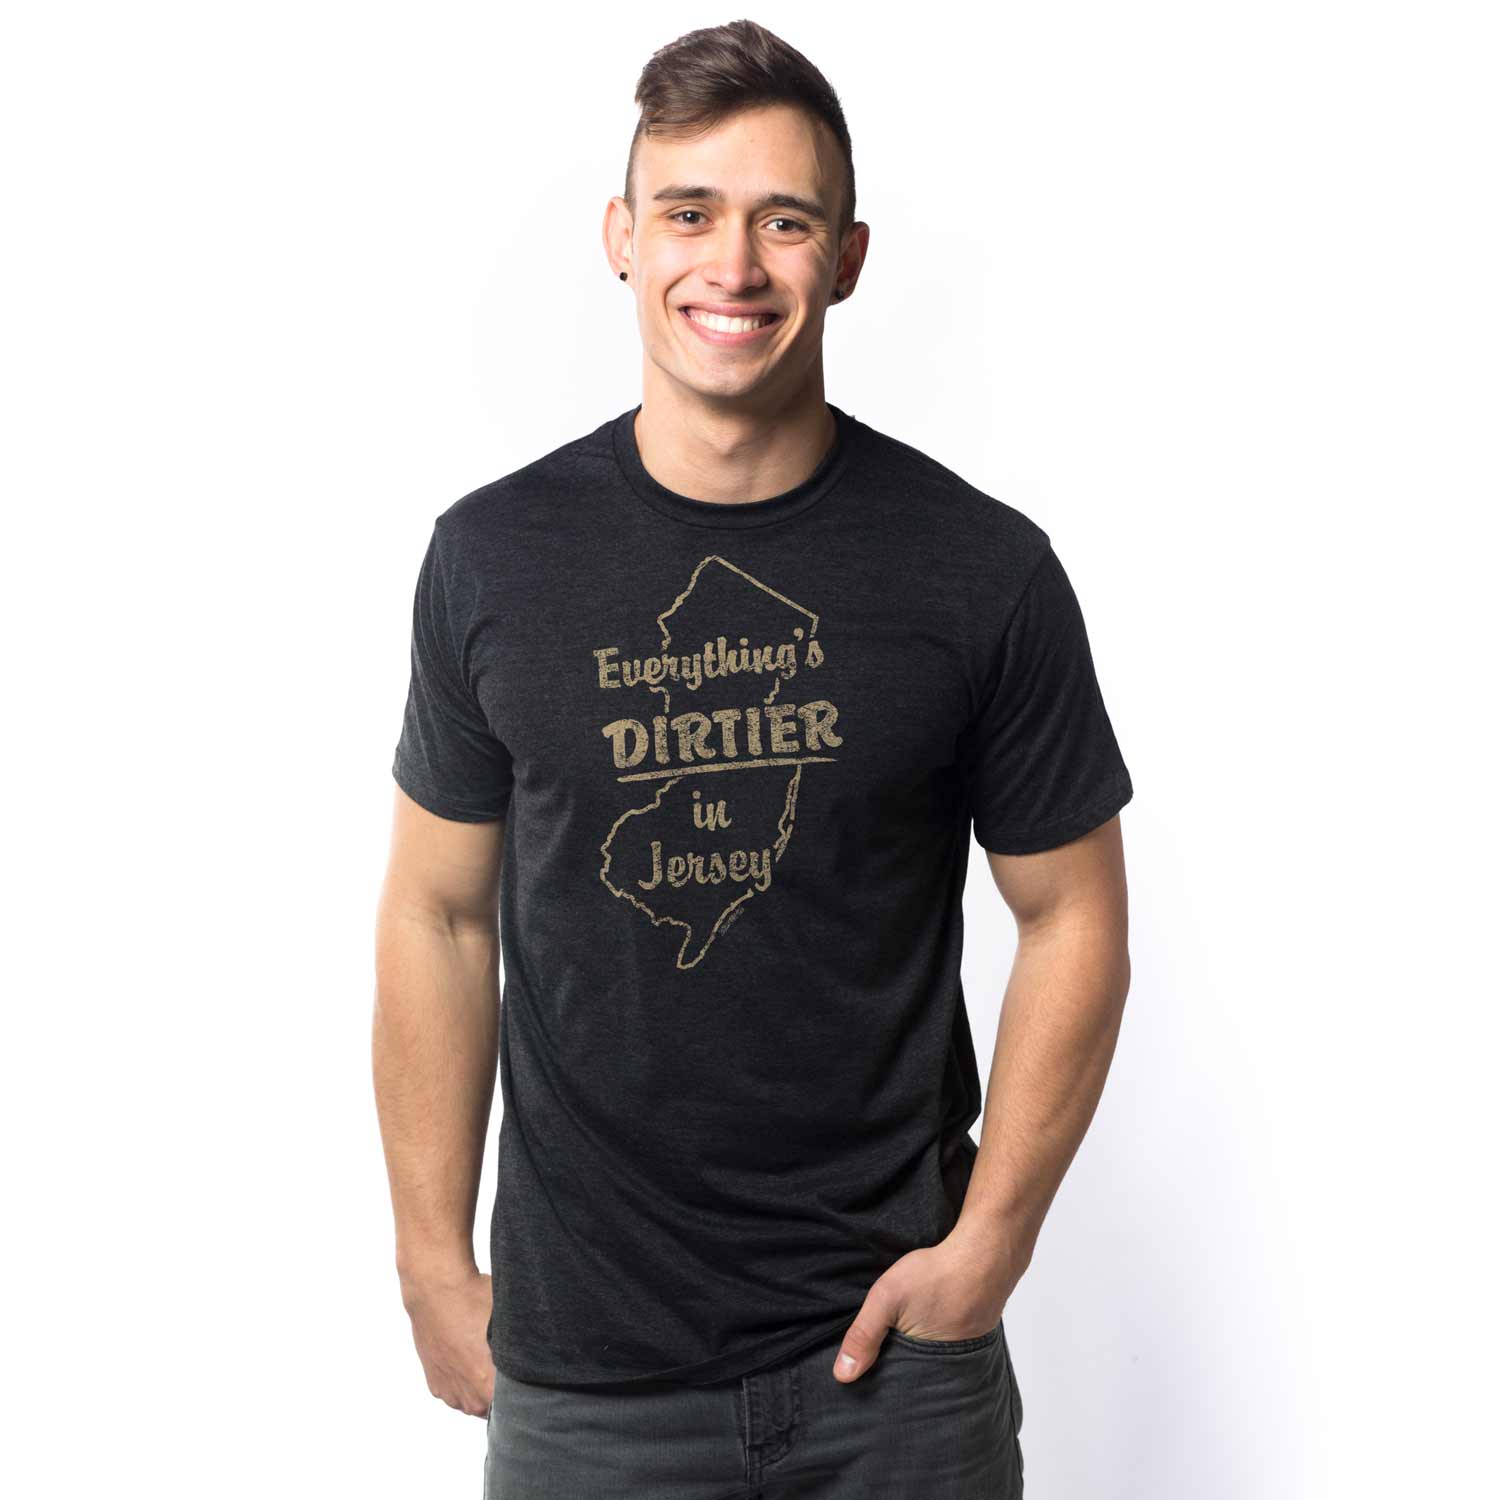 Men's Everything'S Dirtier In Jersey Vintage Graphic T-Shirt | Funny NJ Tee on Model | Solid Threads